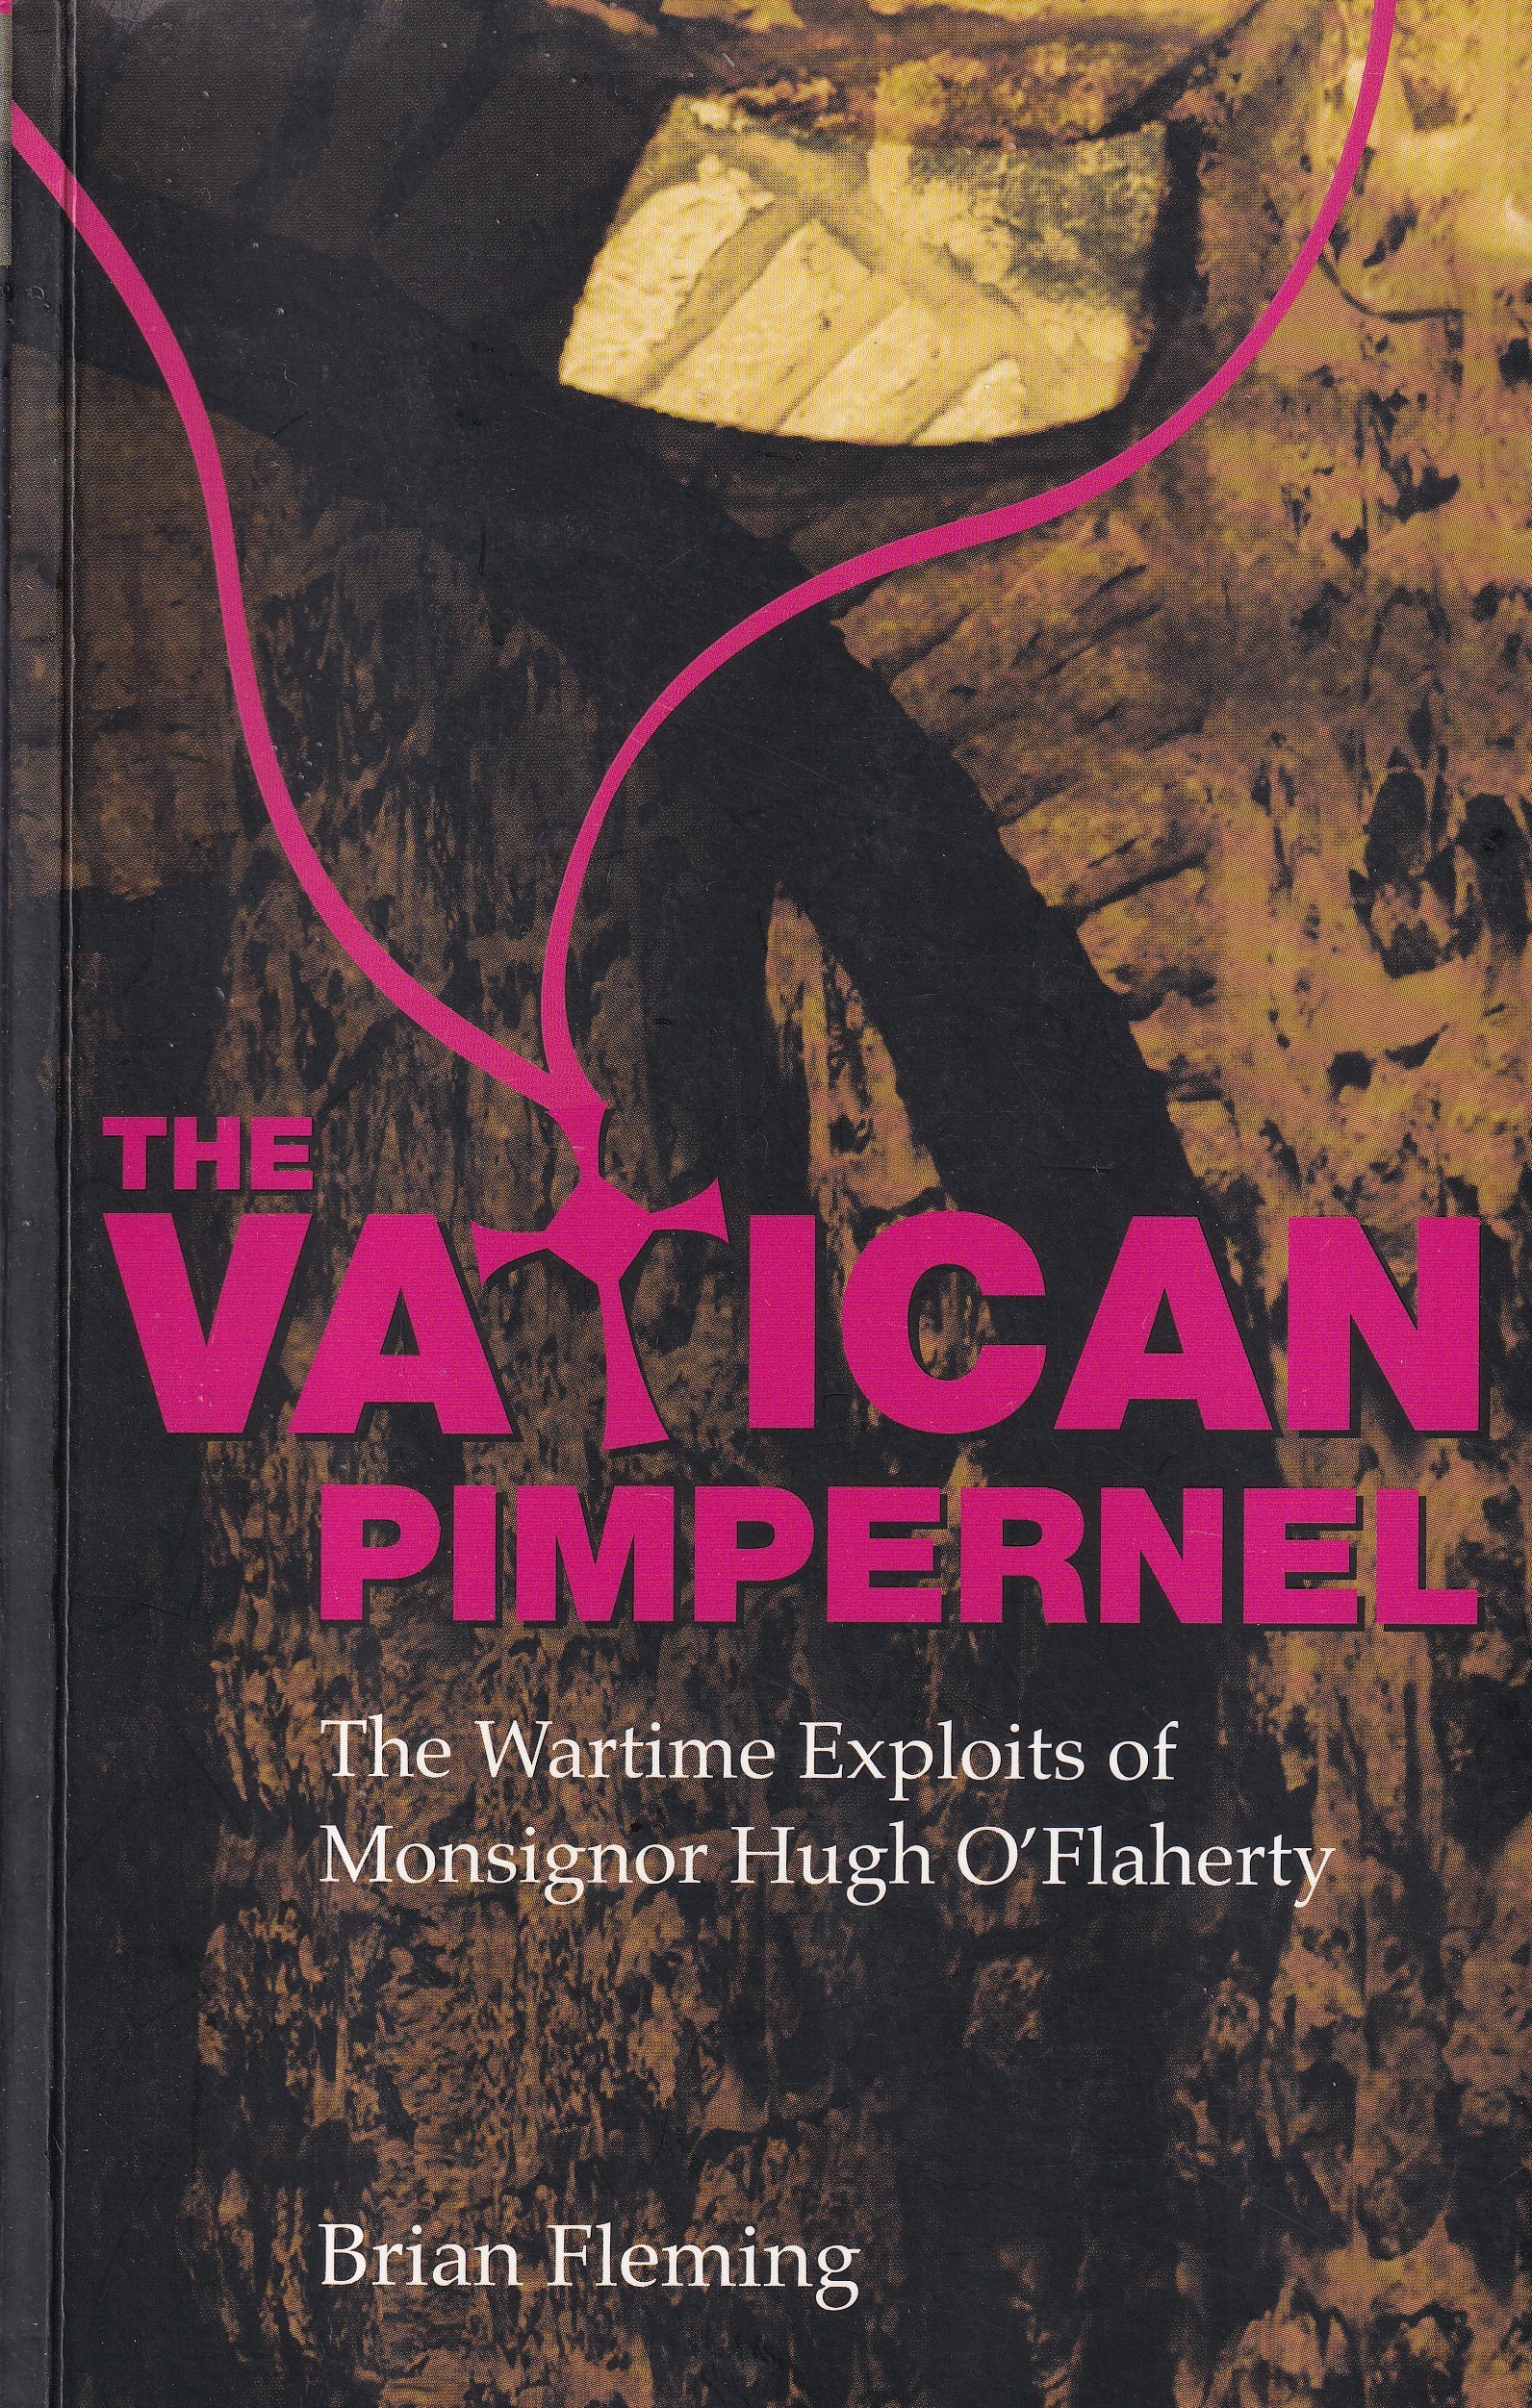 The Vatican Pimpernel: The Wartime Exploits of Monsignor Hugh O’Flaherty | Brian Fleming | Charlie Byrne's